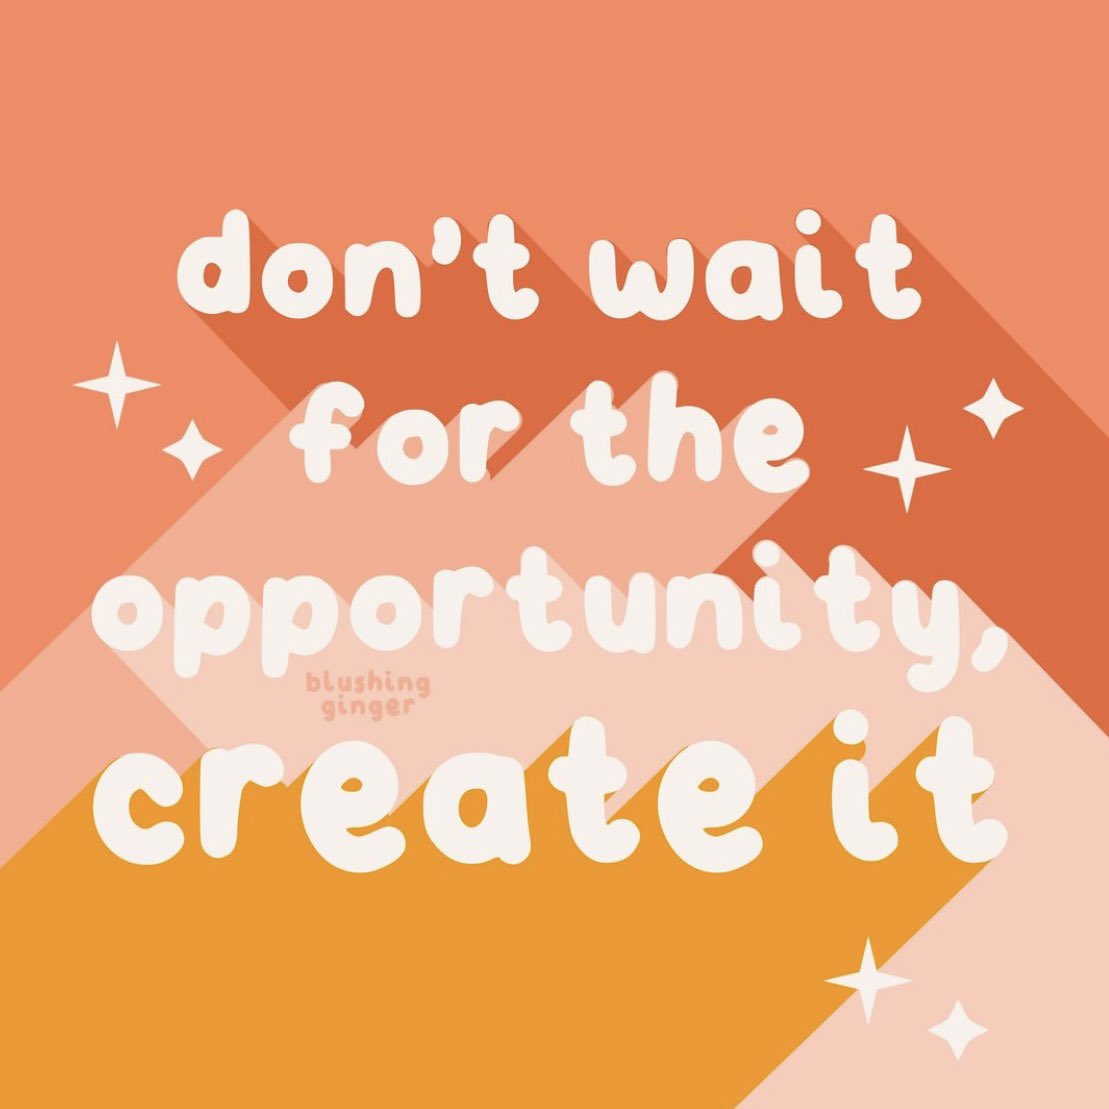 Don’t just wait for the opportunity, try to create it. Take the first step Image: instagram.com/blushing.ginger